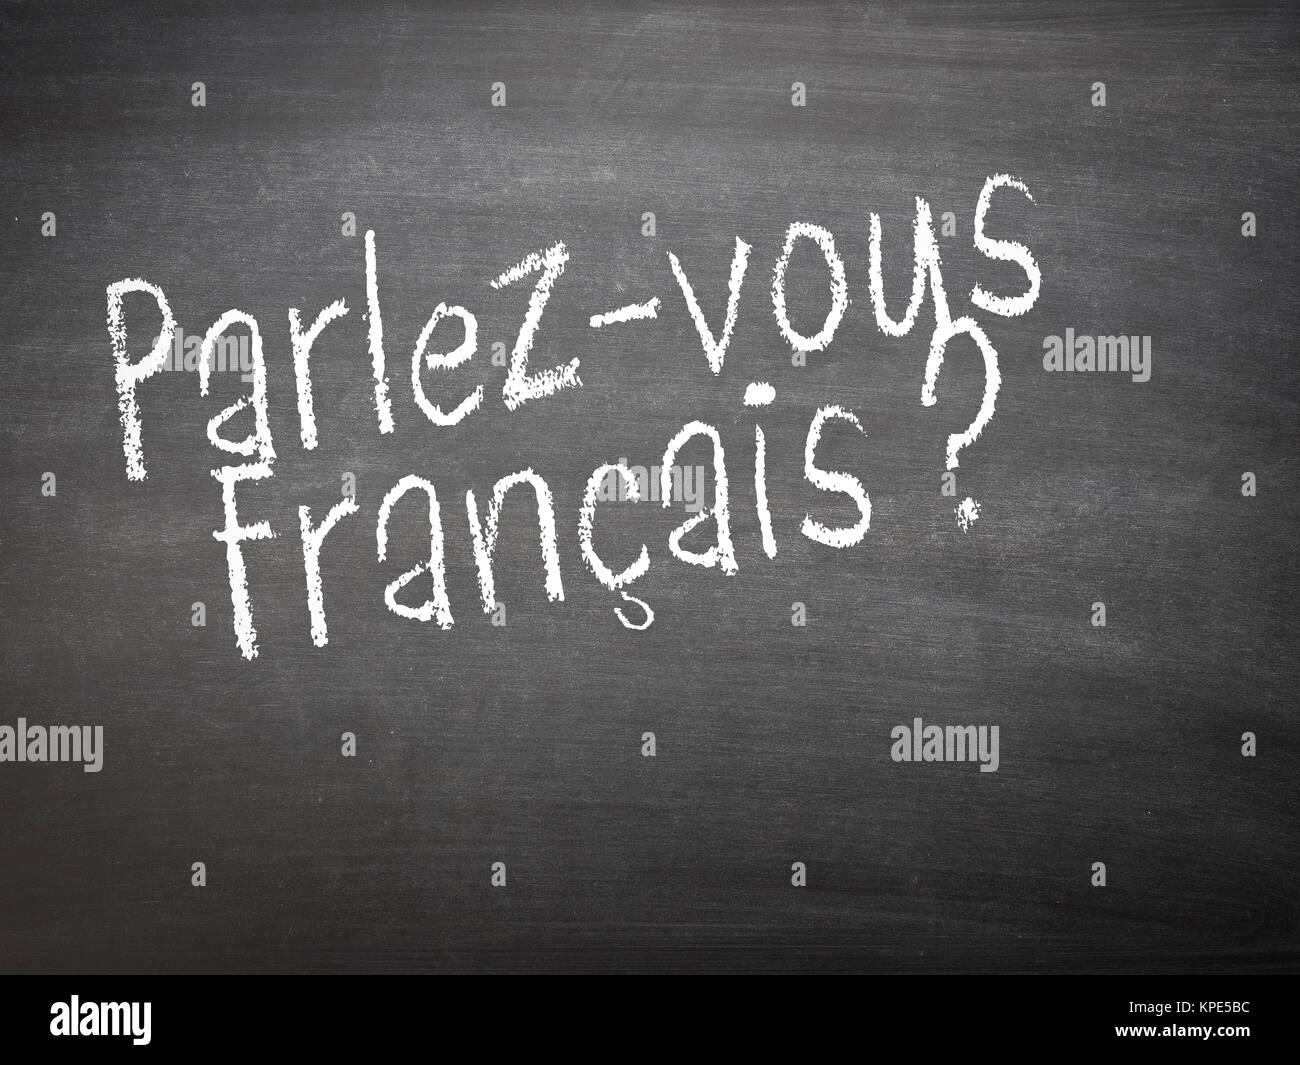 Learning language - French. Learning French language concept of teacher or student writing parlez-vous francais (do you speak French) on blackboard / chalkboard. Stock Photo